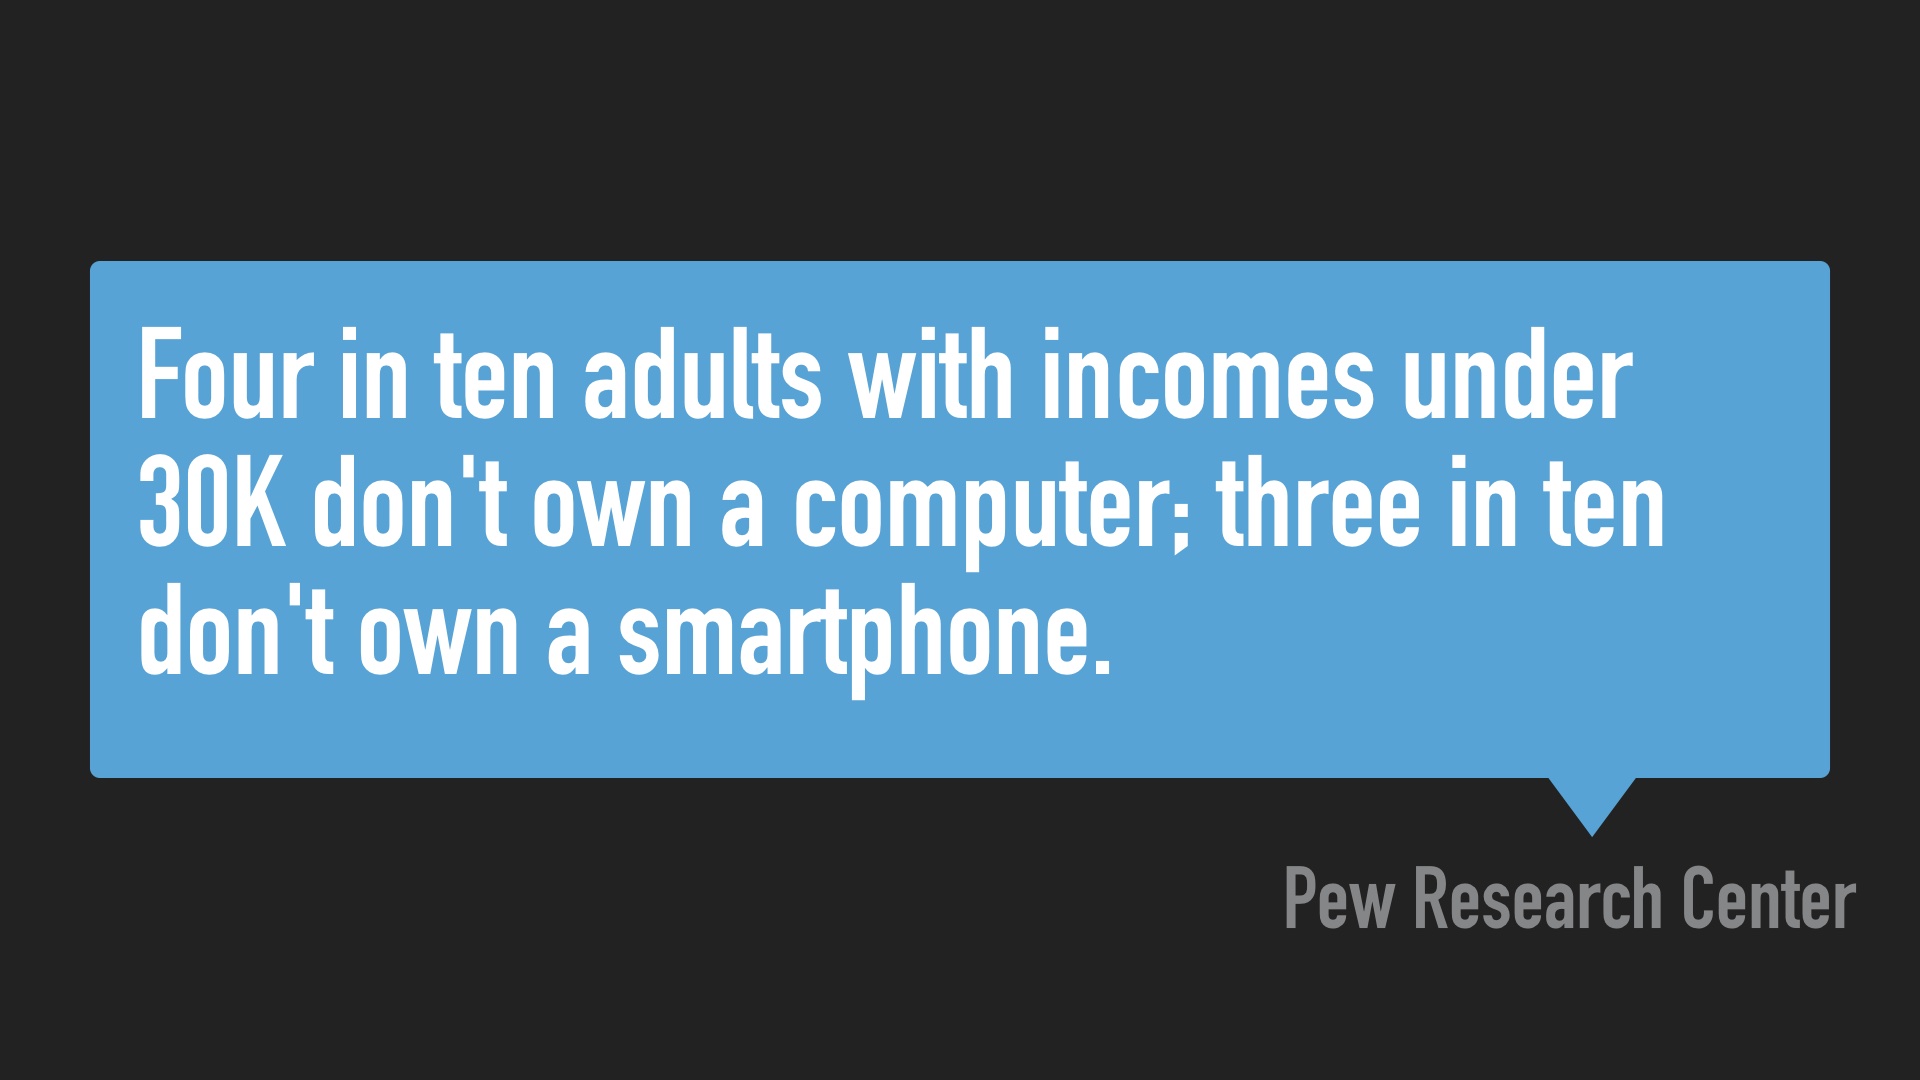 Quotation bubble text: Four in ten adults with incomes under 30K don't own a computer; three in ten don't own a smartphone. from Pew Research center